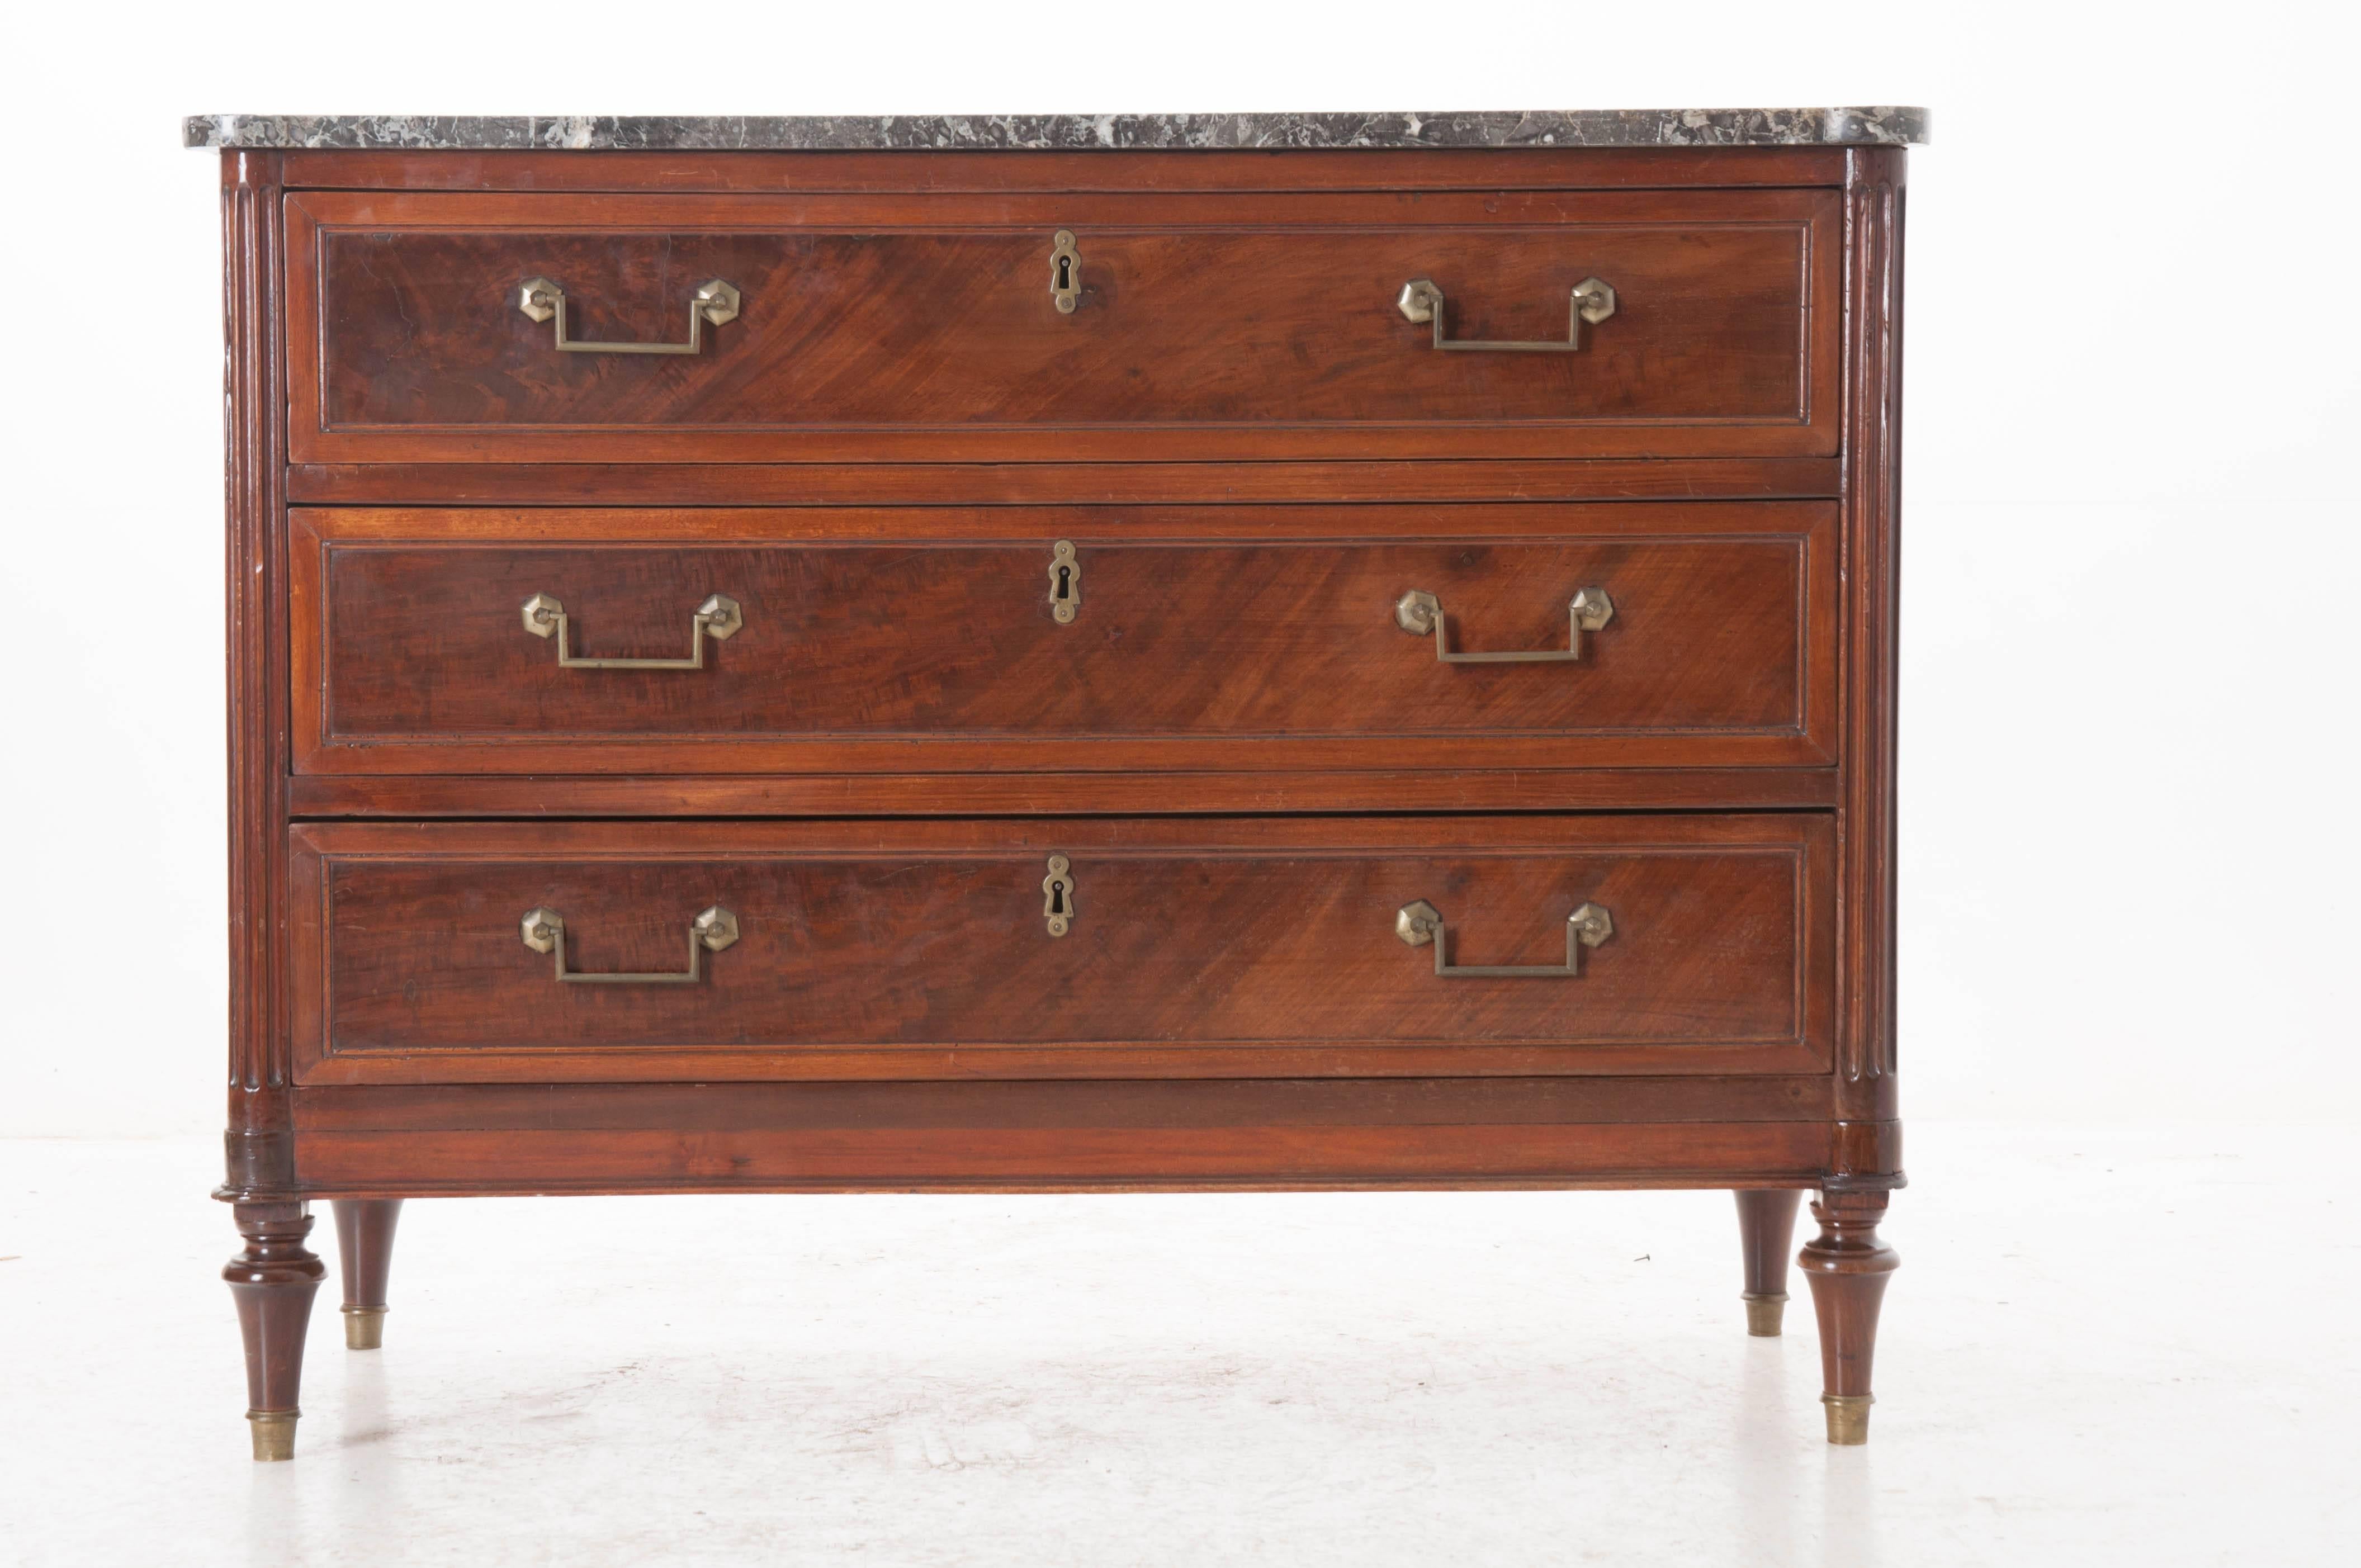 A French Louis XVI three-drawer commode with its original shaped, gray marble top. The facade is dominated by the piece's three large drawers. These are each finished with continuous, unbroken pieces of mahogany veneer and retain their original